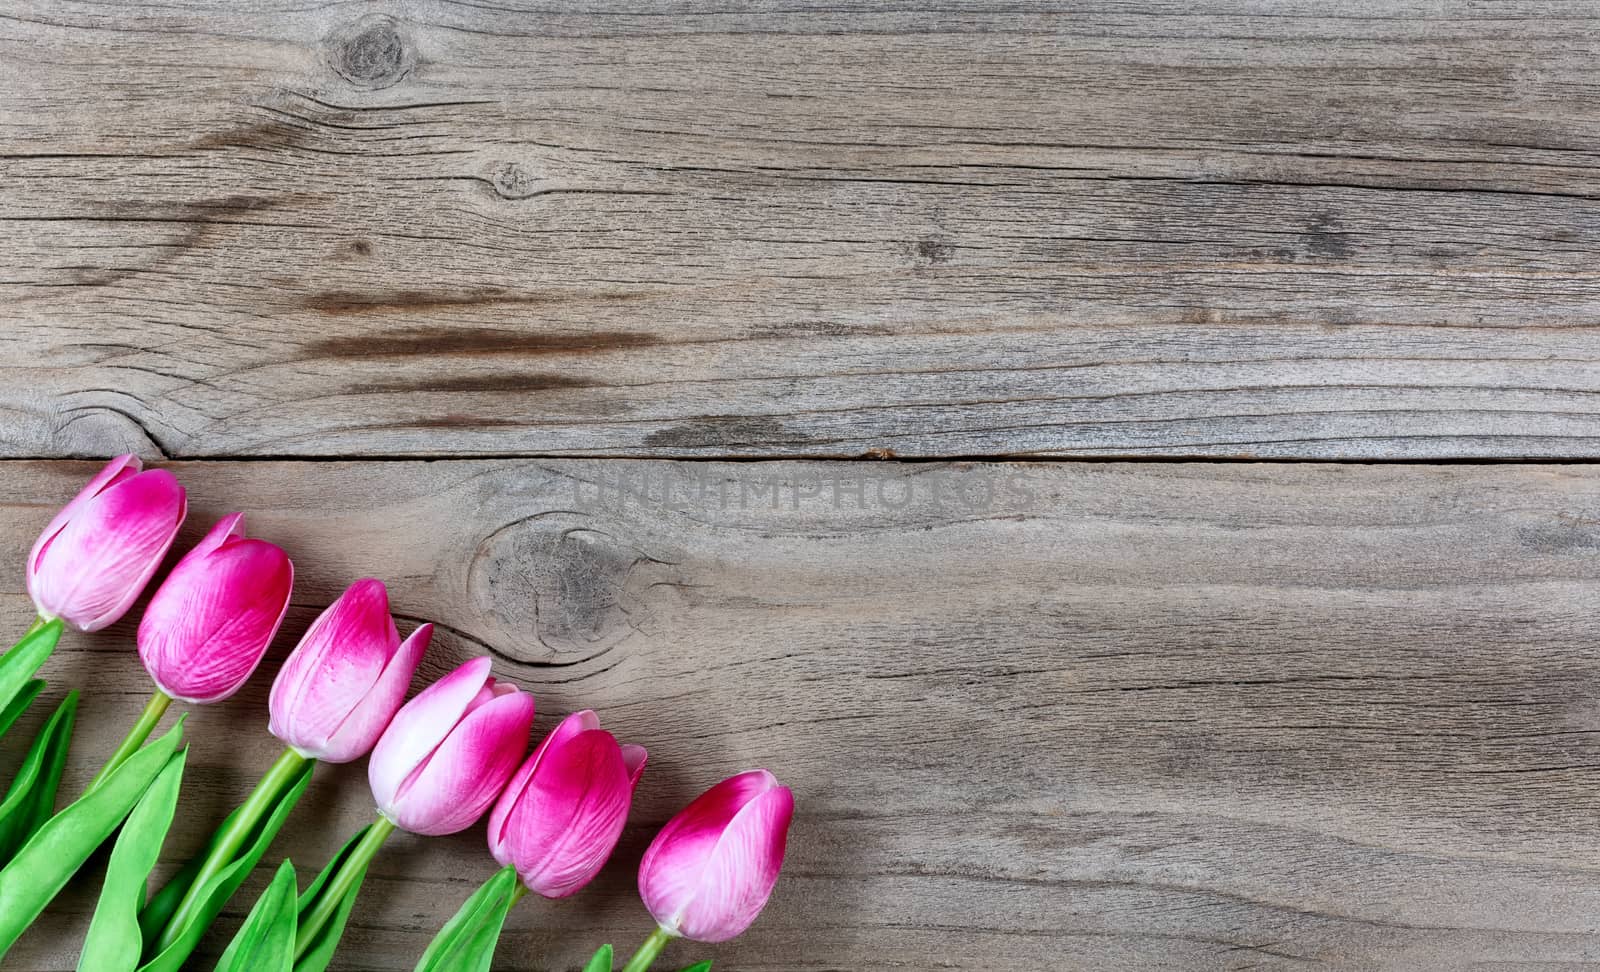 Pink tulips on rustic wooden boards for Easter Background 